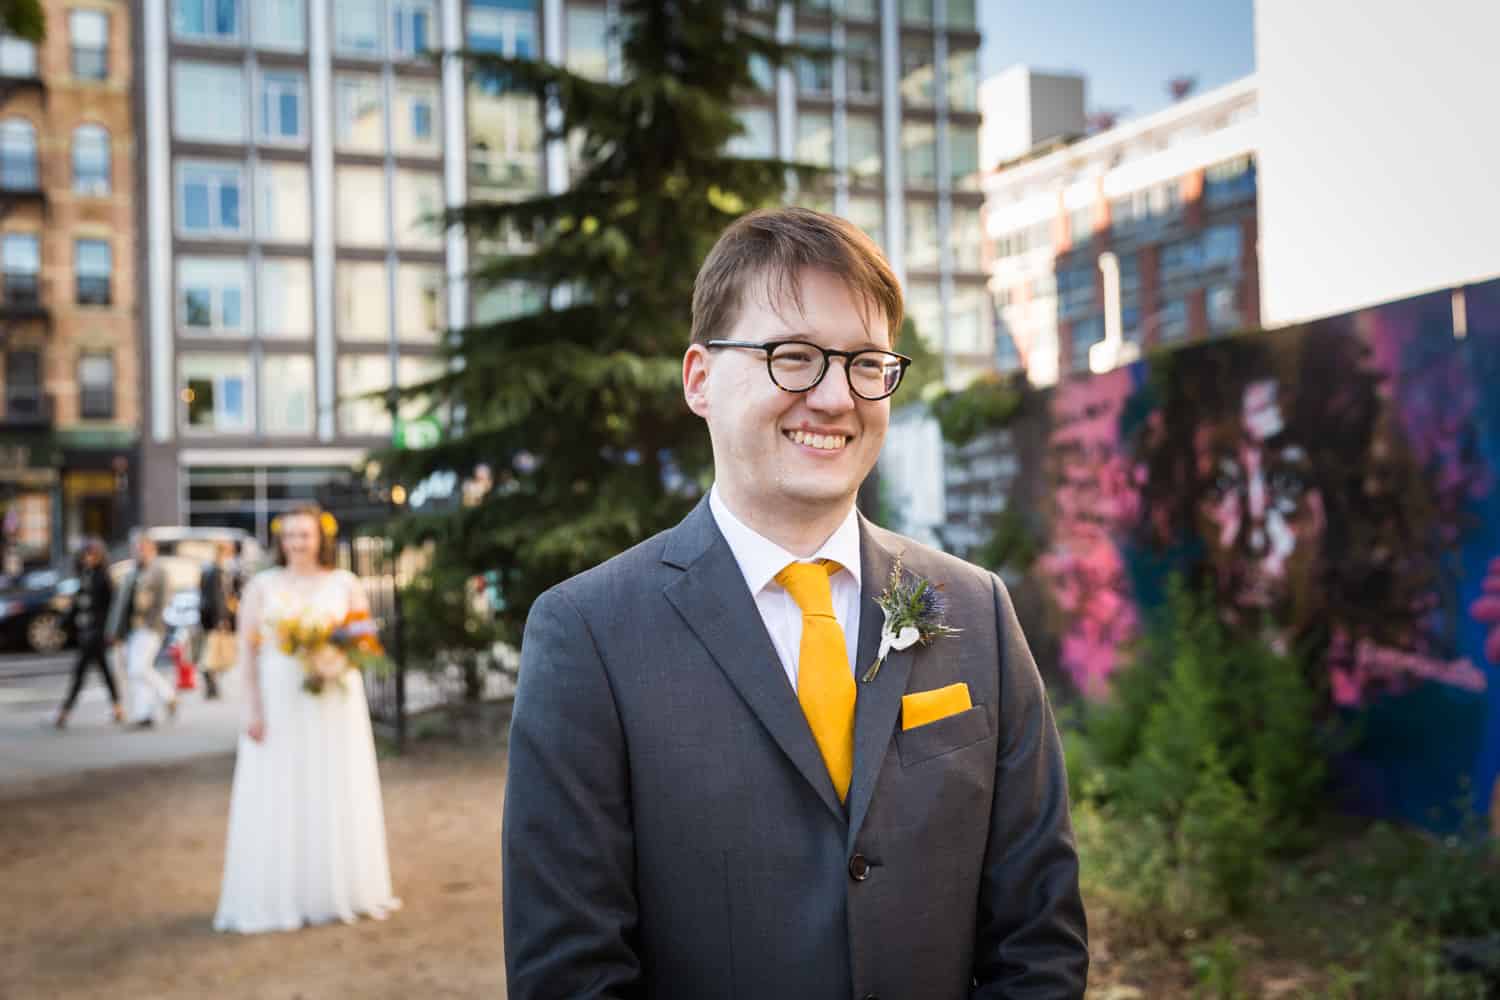 Groom waiting for first look to begin with bride